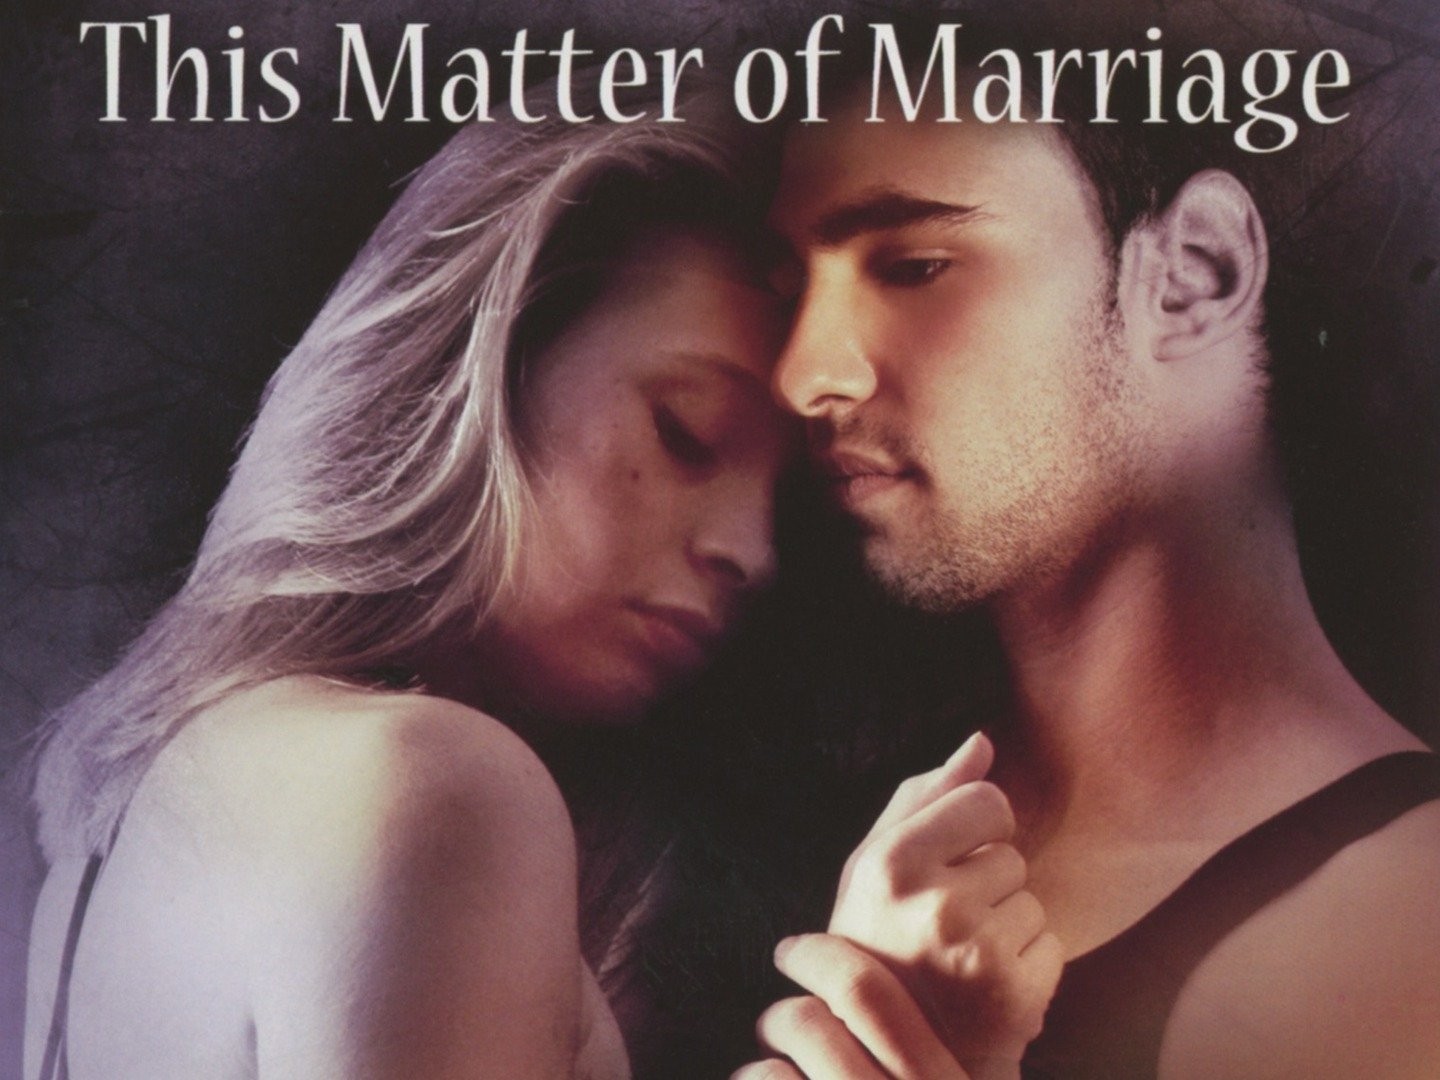 This matter of marriage movie